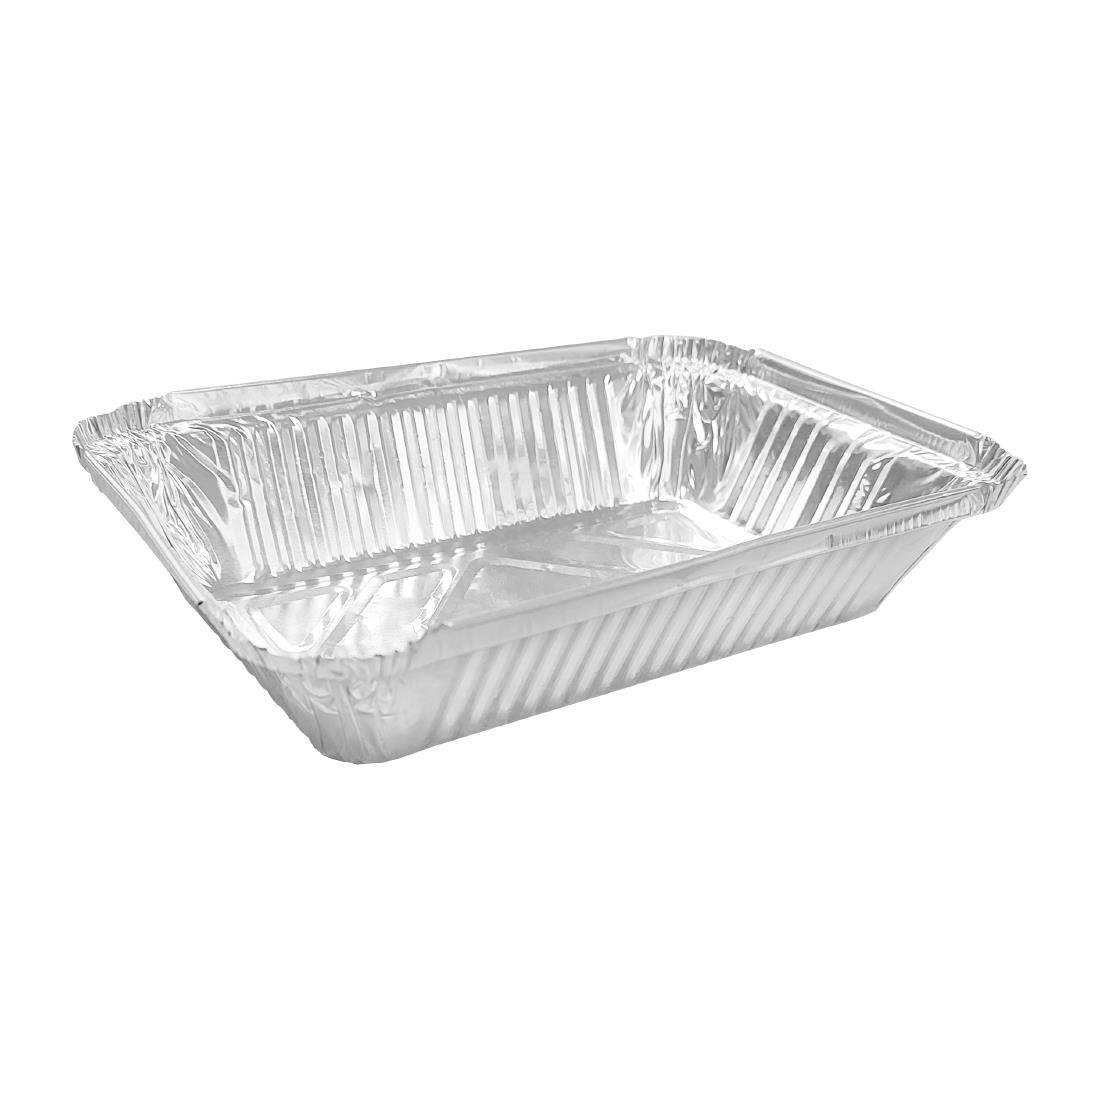 Fiesta Recyclable Foil Containers 725ml Pack of 500 (DP260)